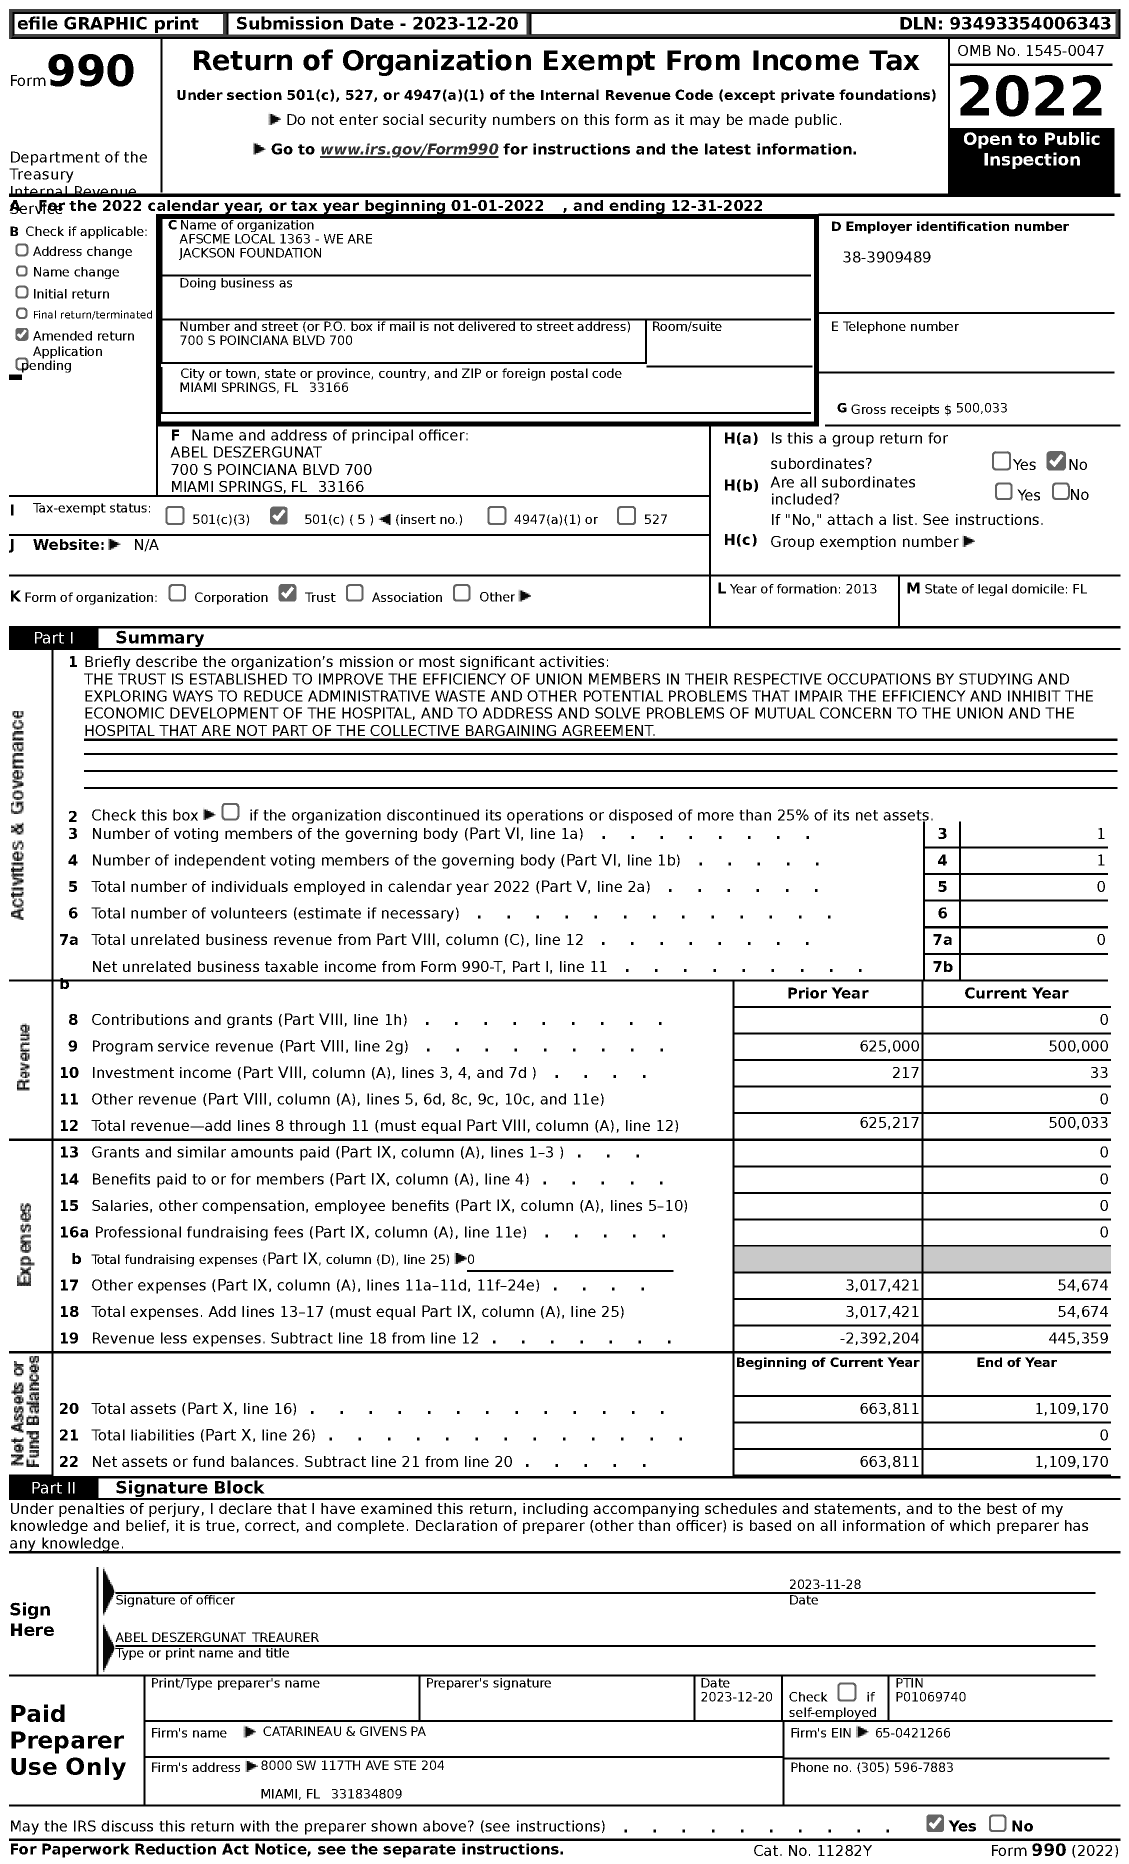 Image of first page of 2022 Form 990 for AFSCME Local 1363 - We Are Jackson Foundation